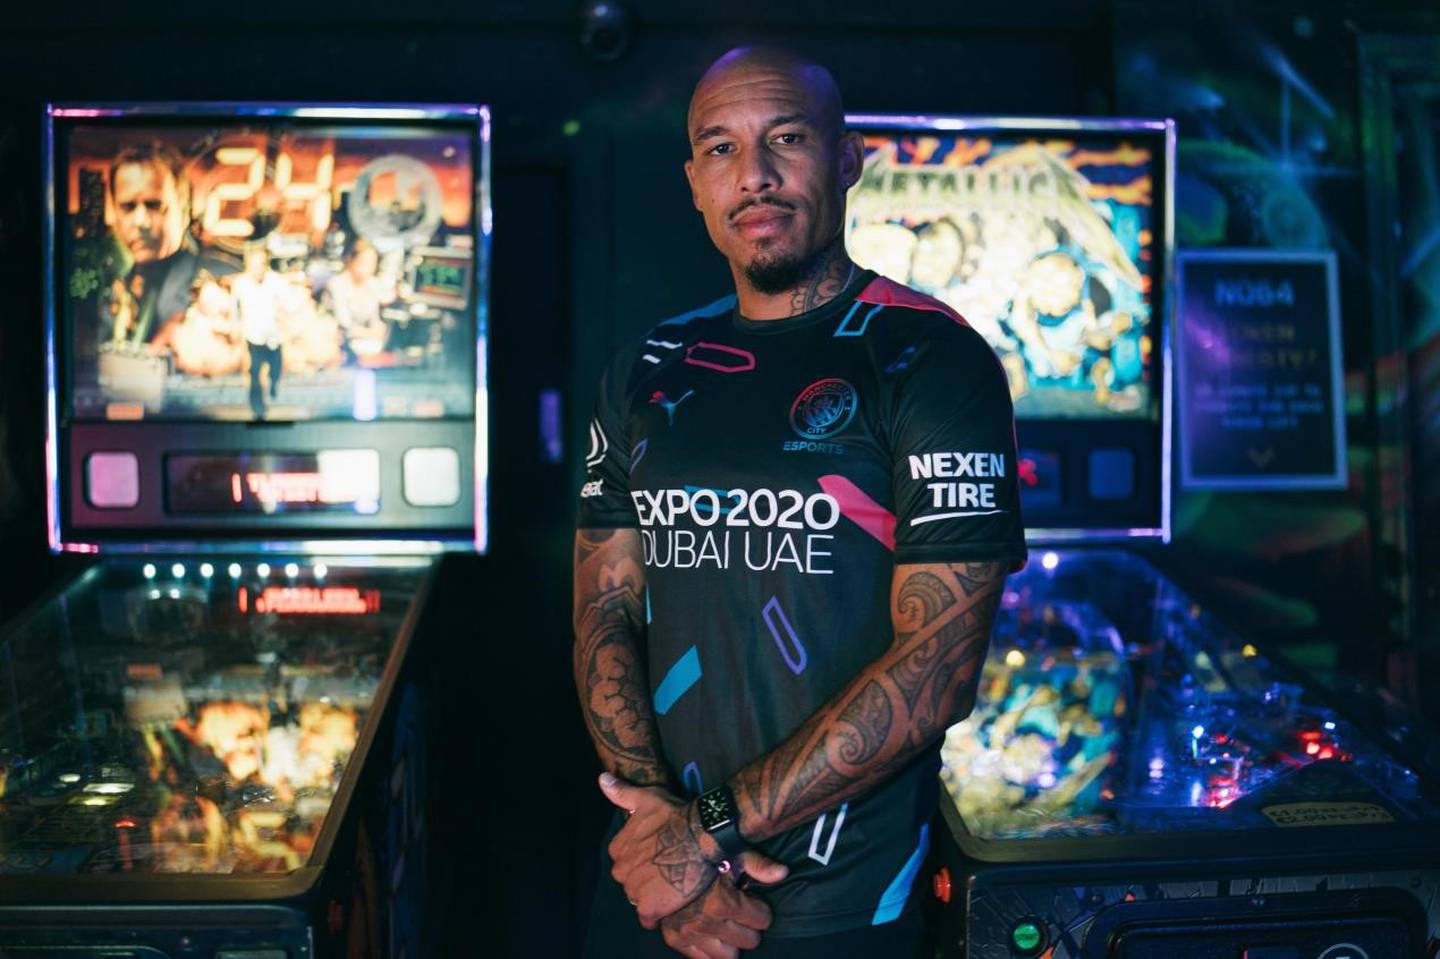 Former Manchester City star Nigel de Jong will meet fans before the live-screening of the game against Manchester United on Sunday. Photo: Expo 2020 Dubai